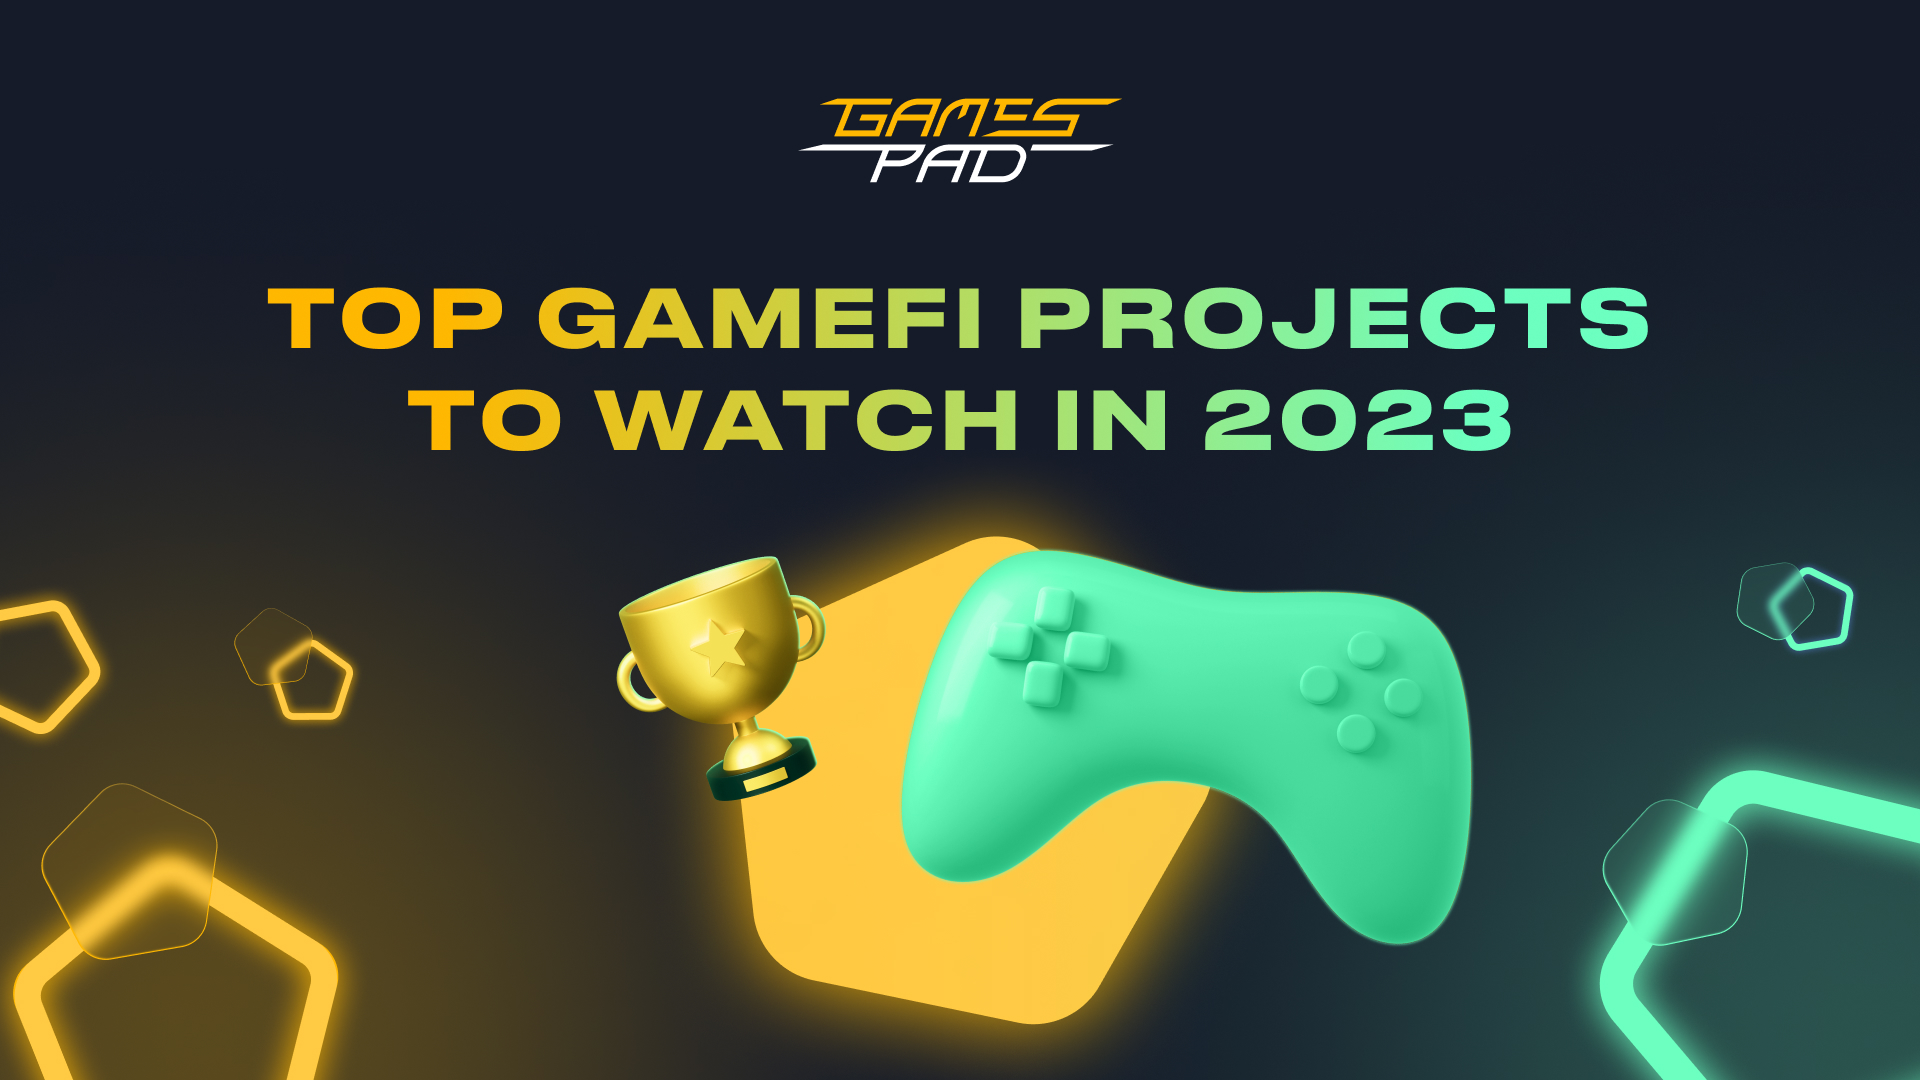 Top GameFi Projects to Watch In 2023